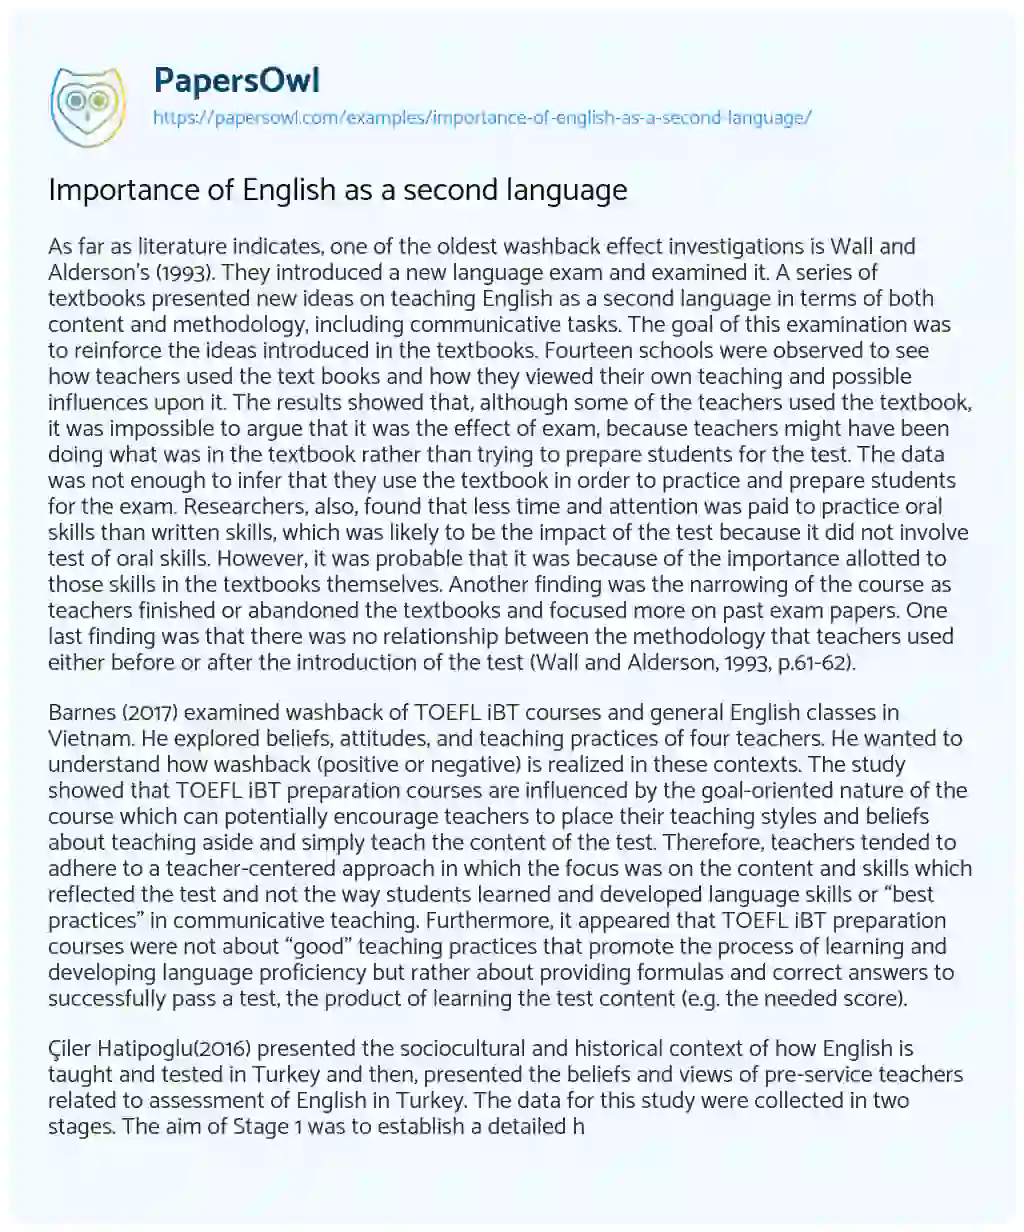 Essay on Importance of English as a Second Language